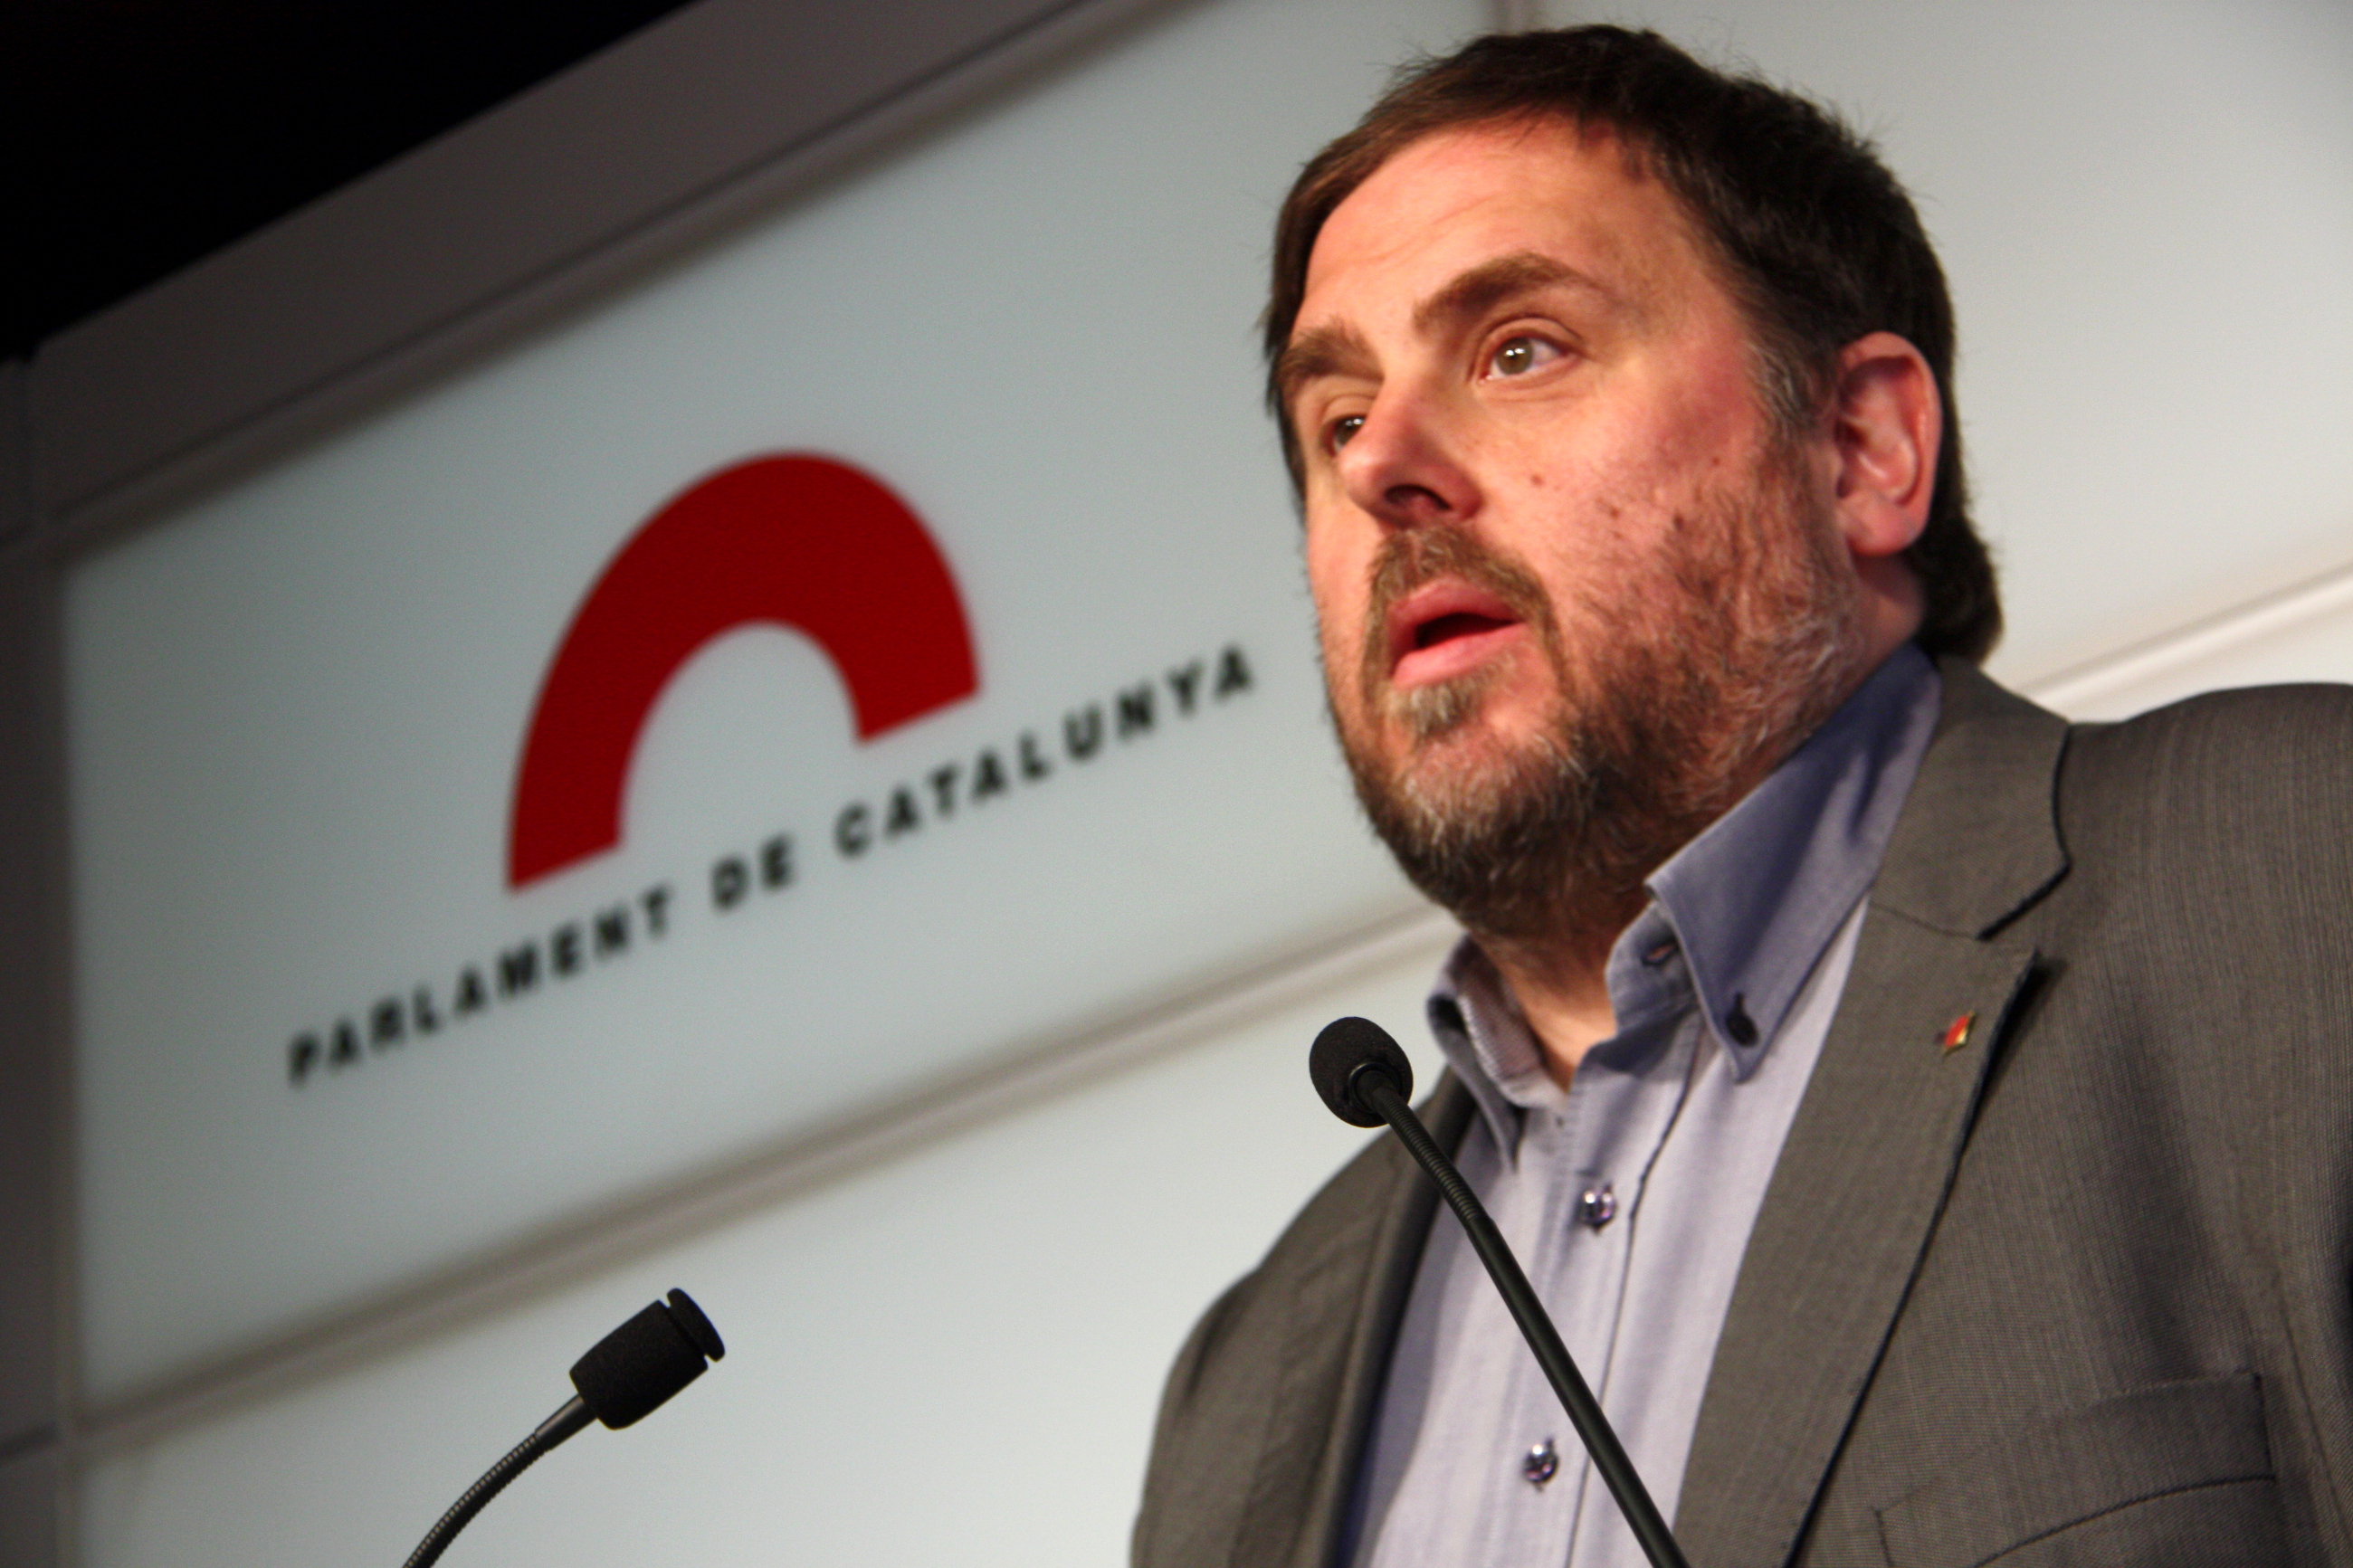 Catalan vice president and Catalan Minister for Economy and Tax Agency, Oriol Junqueras (by ACN)